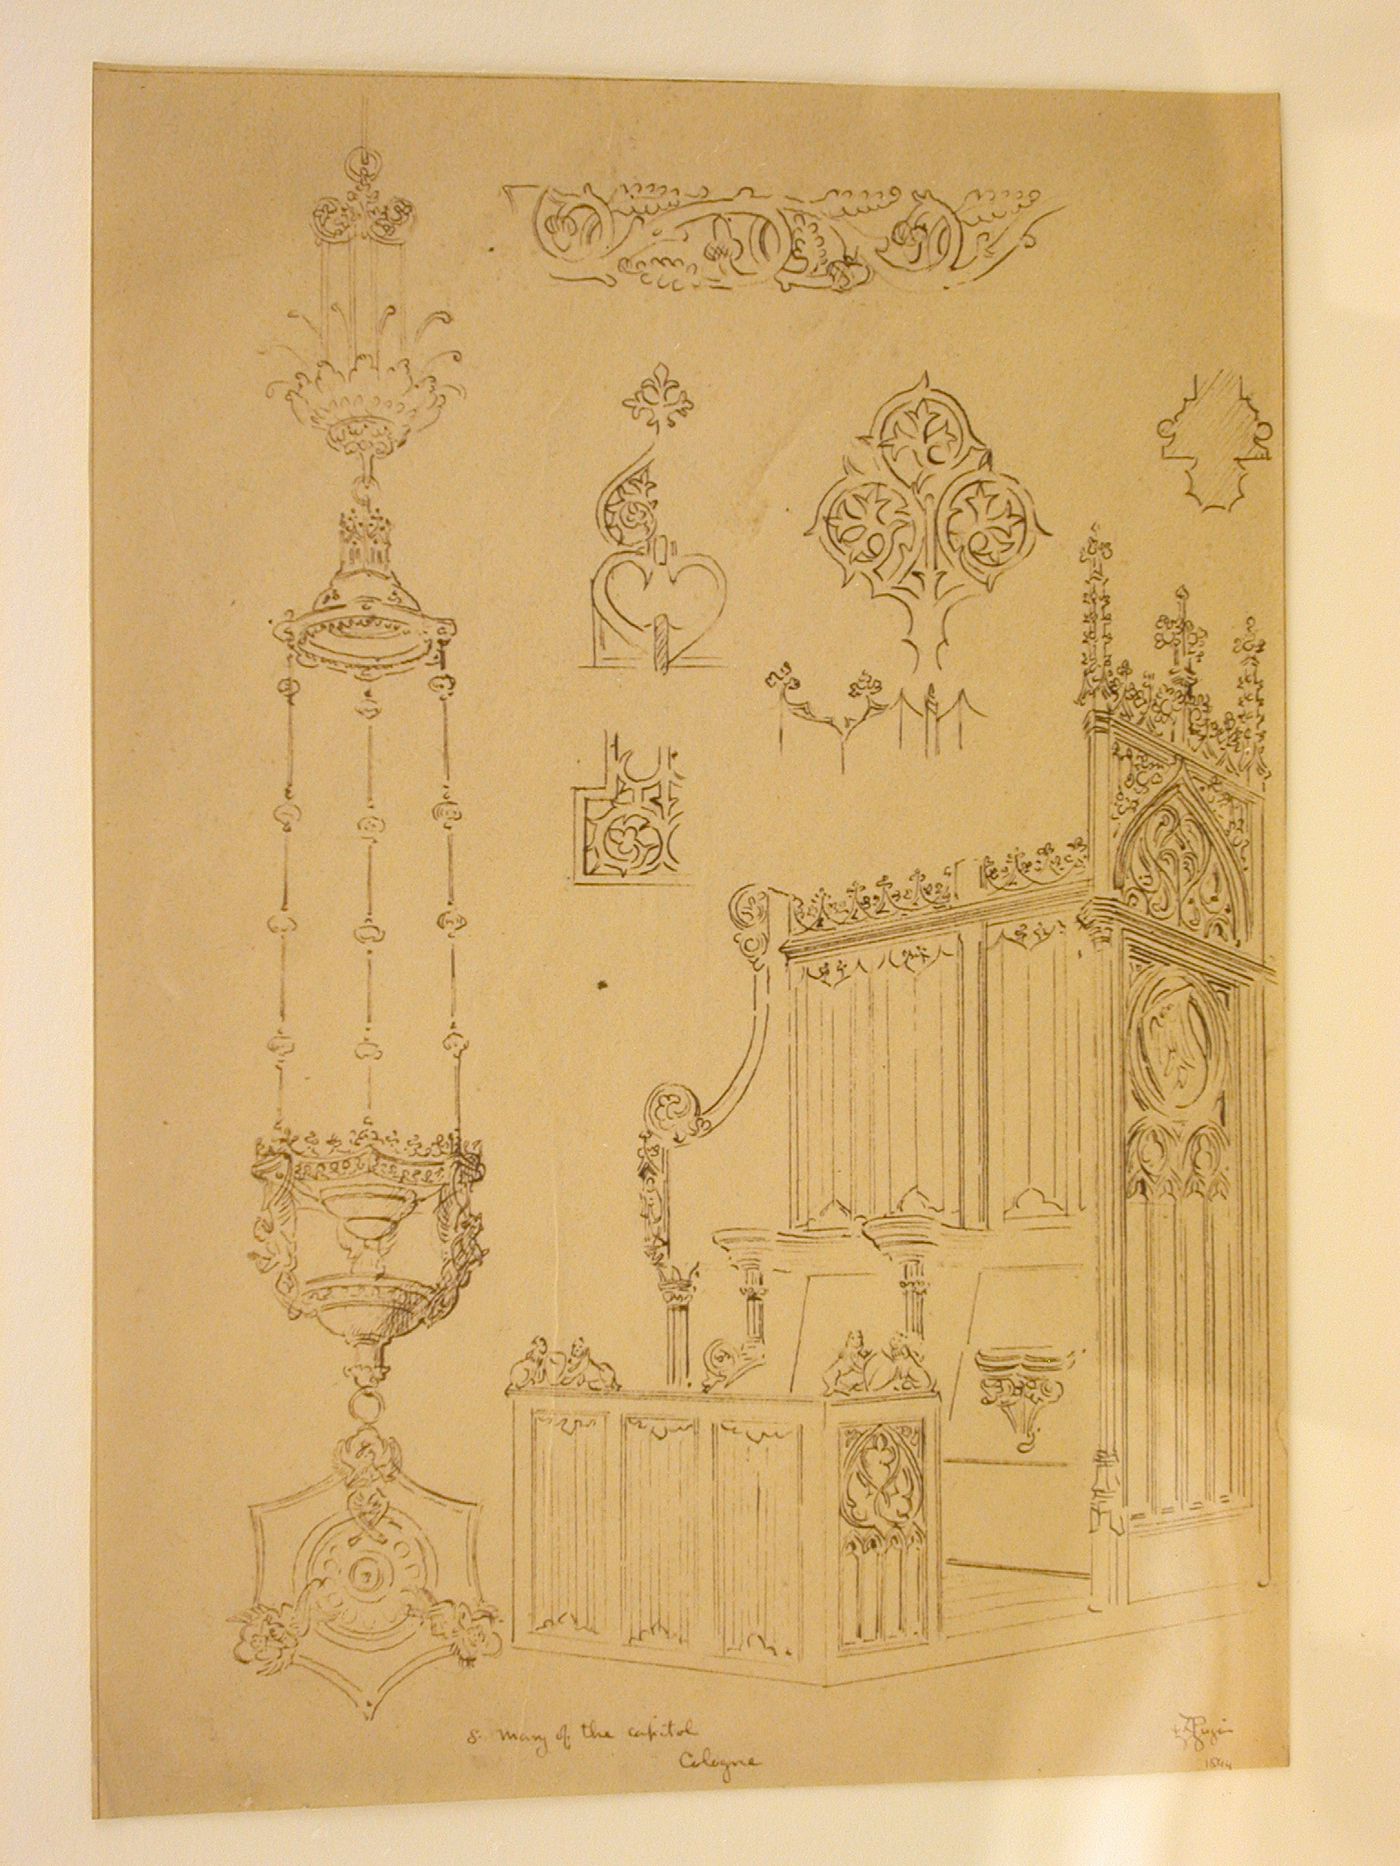 Photograph of a rendering by Augustus Welby Northmore Pugin of details of St. Maria im Kapitol including a box pew and metalwork, Cologne, Germany